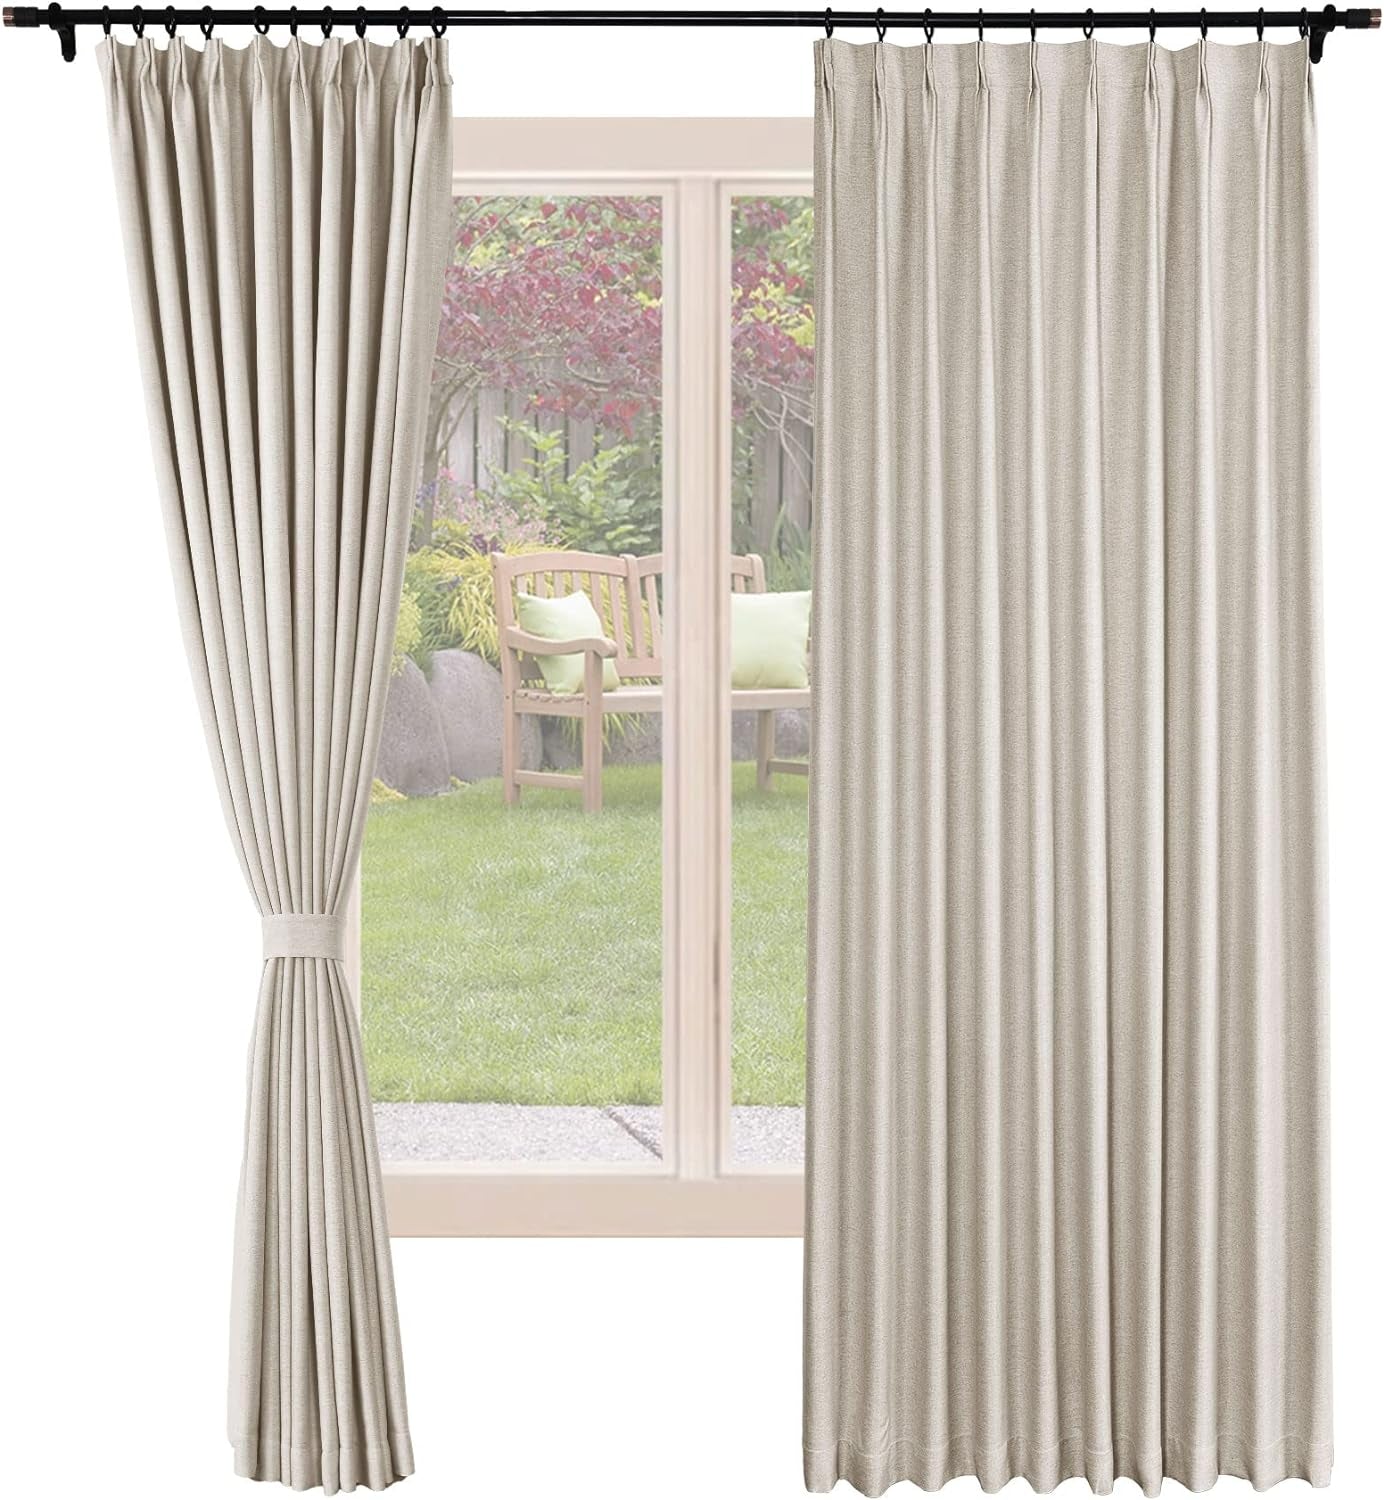 Frelement Blackout Curtains Natural Linen Curtains Pinch Pleat Drapery Panels for Living Room Thermal Insulated Curtains, 52" W X 63" L, 2 Panels, Oasis  Frelement 02 Smoky Grey (84Wx96L Inch)*2 